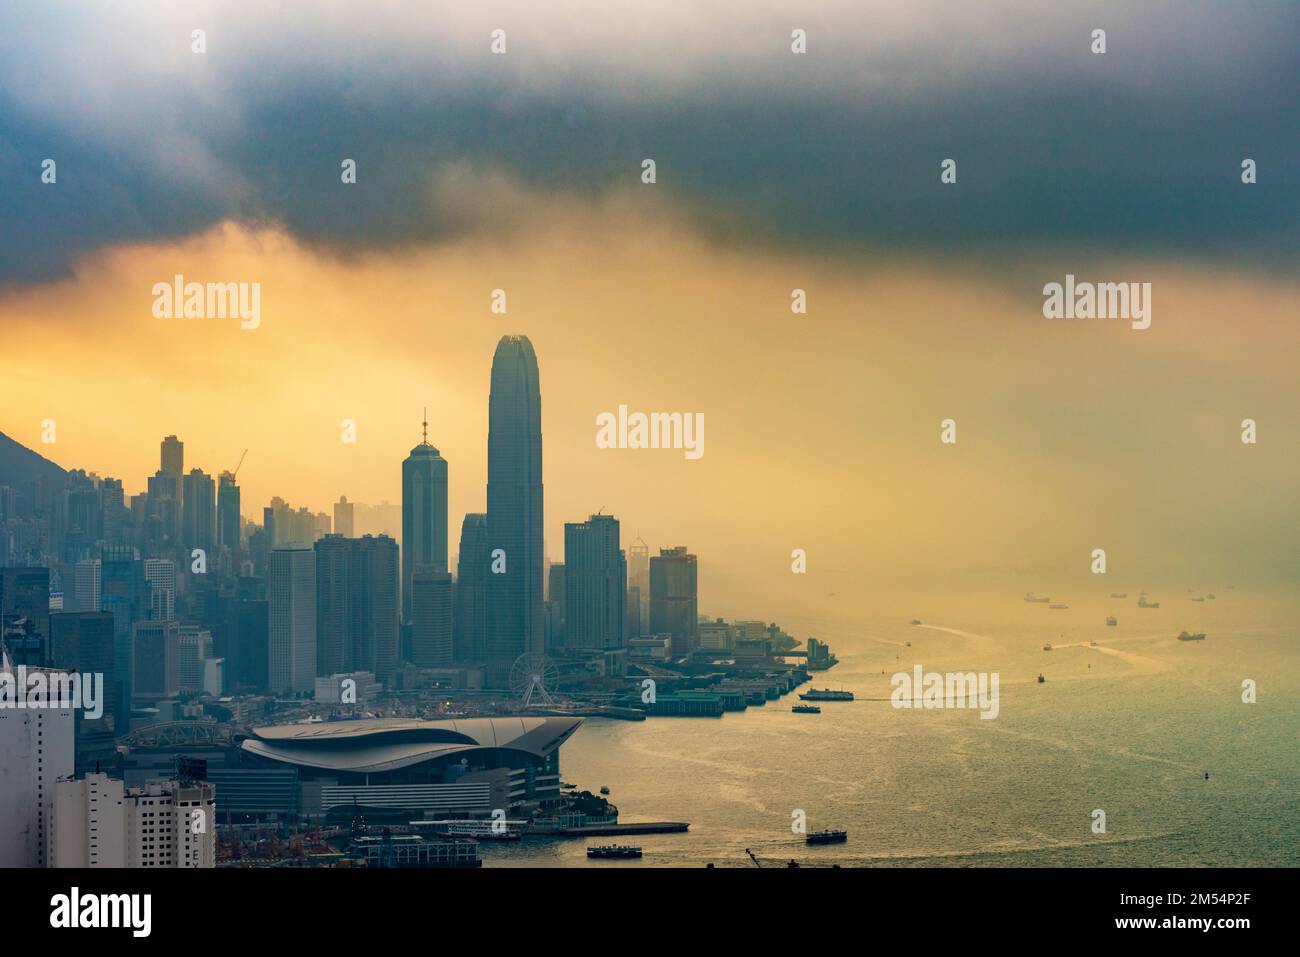 An approaching storm combines with smog to shroud the Hong Kong Island skyline, 2016 Stock Photo